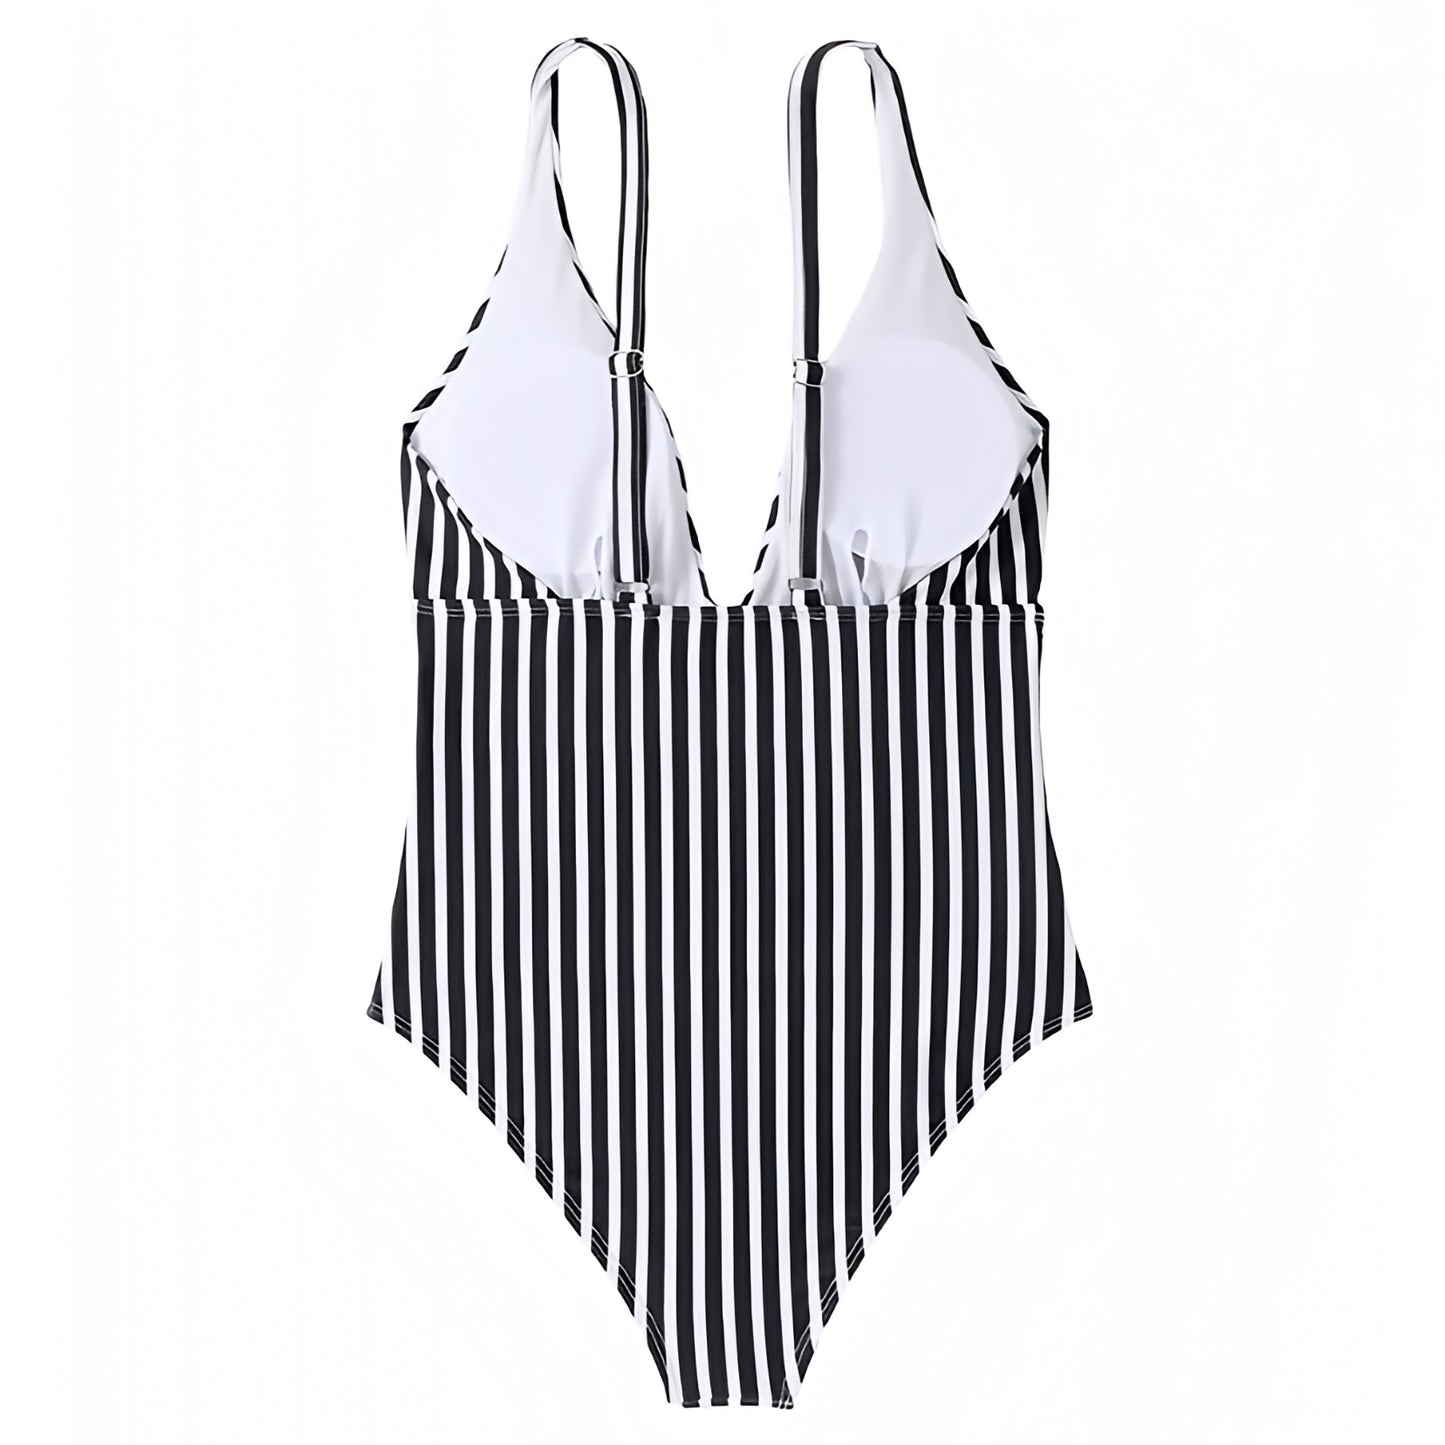 black-and-white-striped-seersucker-pinstriped-patterned-slim-fit-bodycon-cut-out-v-neck-spaghetti-strap-sleeveless-backless-open-back-wireless-push-up-cheeky-thong-modest-one-piece-swimsuit-swimwear-bathing-suit-women-ladies-teens-tweens-chic-trendy-spring-2024-summer-elegant-classic-feminine-classy-preppy-style-european-vacation-coastal-granddaughter-grandmillennial-beach-wear-revolve-minow-oneone-frankies-bikinis-blackbough-kulakinis-same-dupe